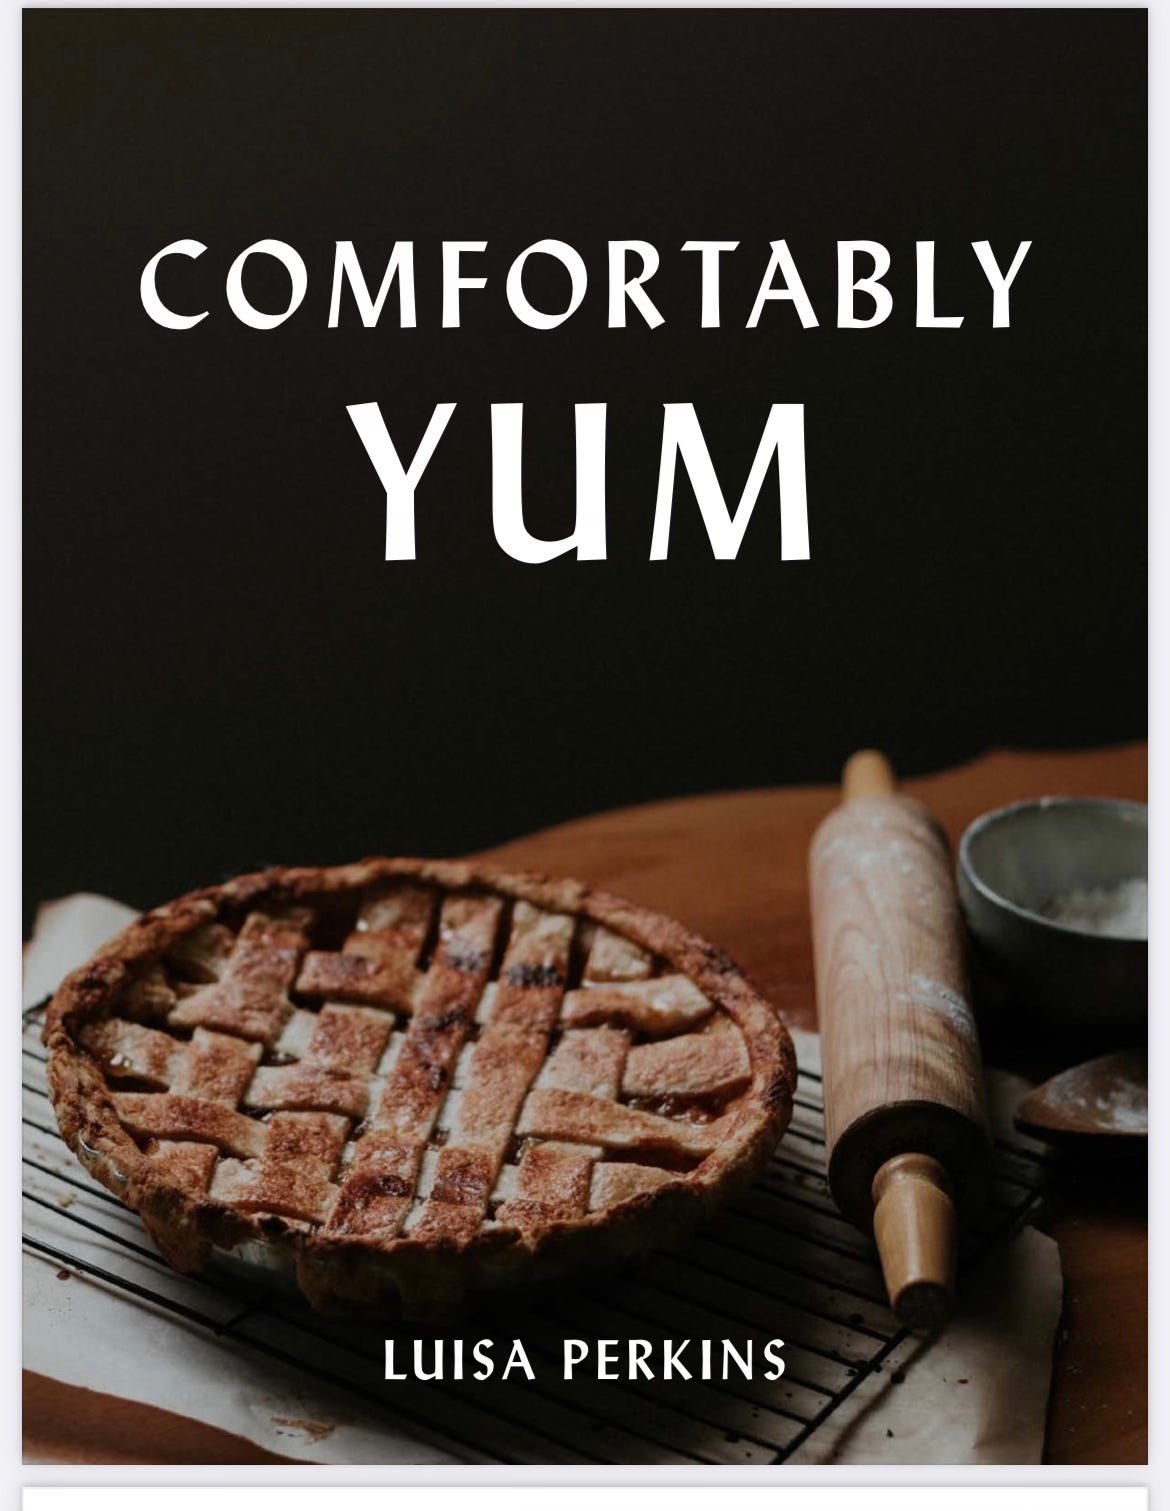 Cover of Comfortably Yum cookbook with a rolling pin and apple pie pictured